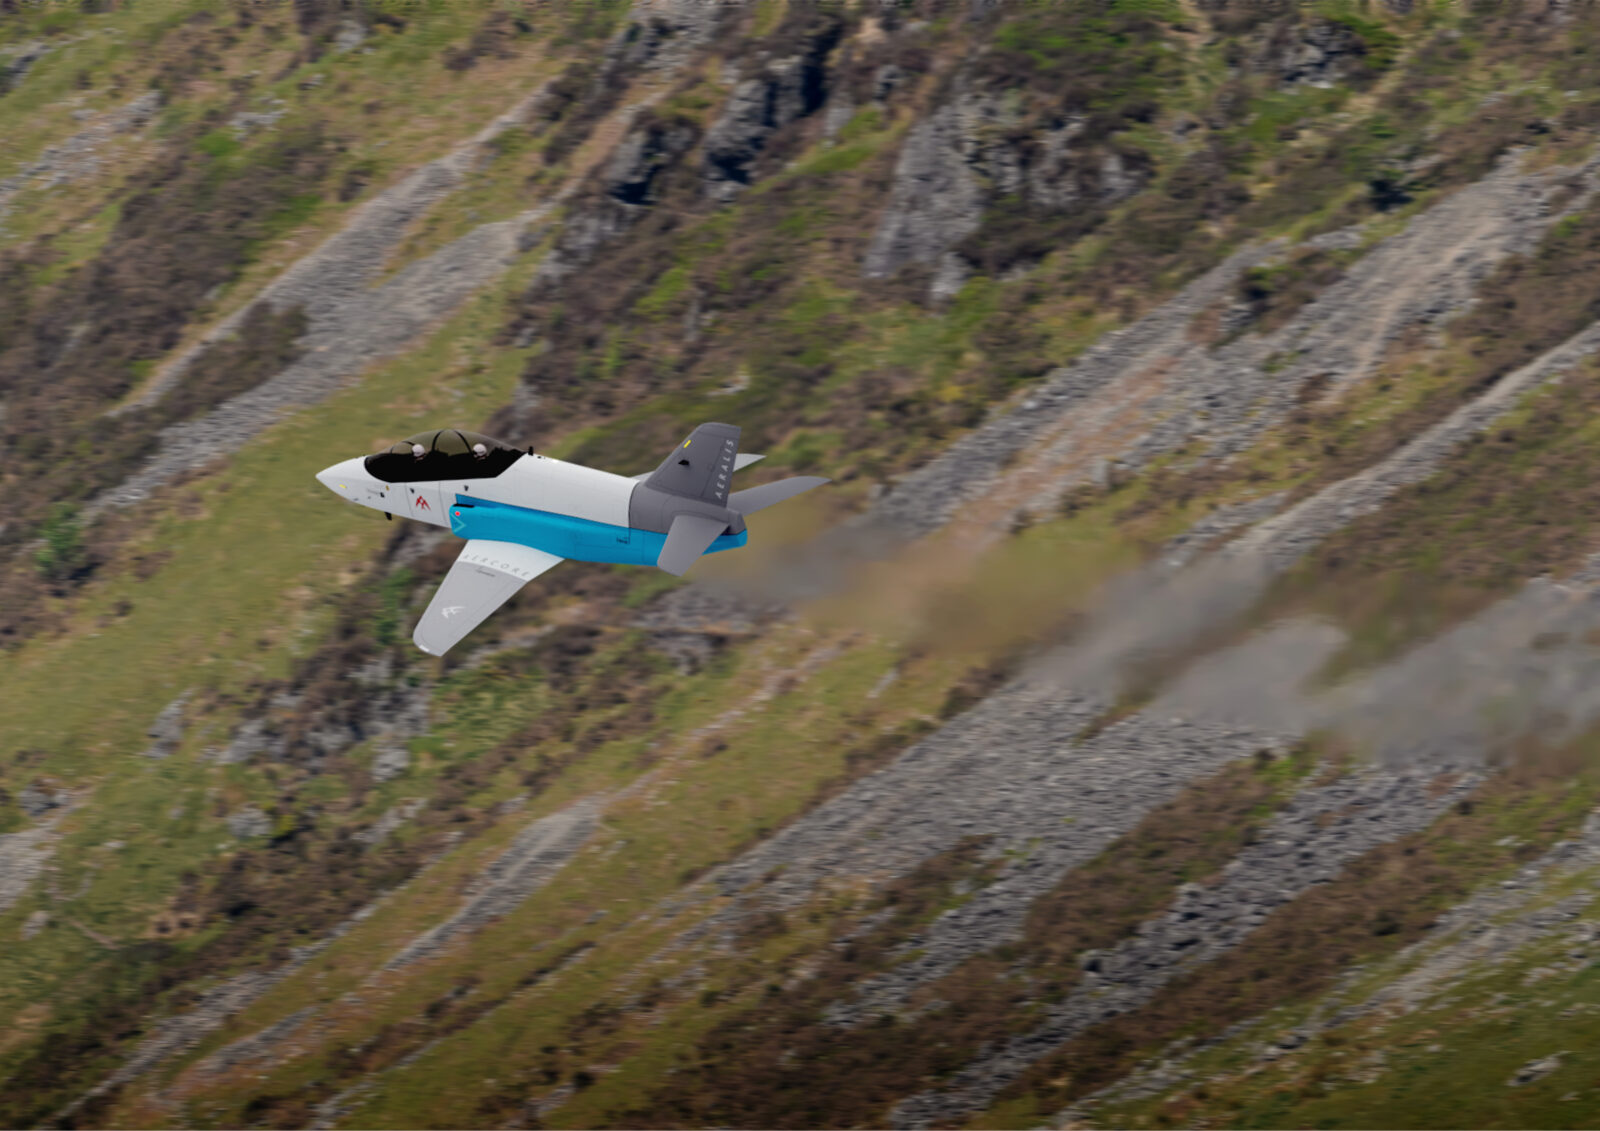 An AERALIS Trainer jet with twin engines roars away from the camera at low level through a valley in North Wales